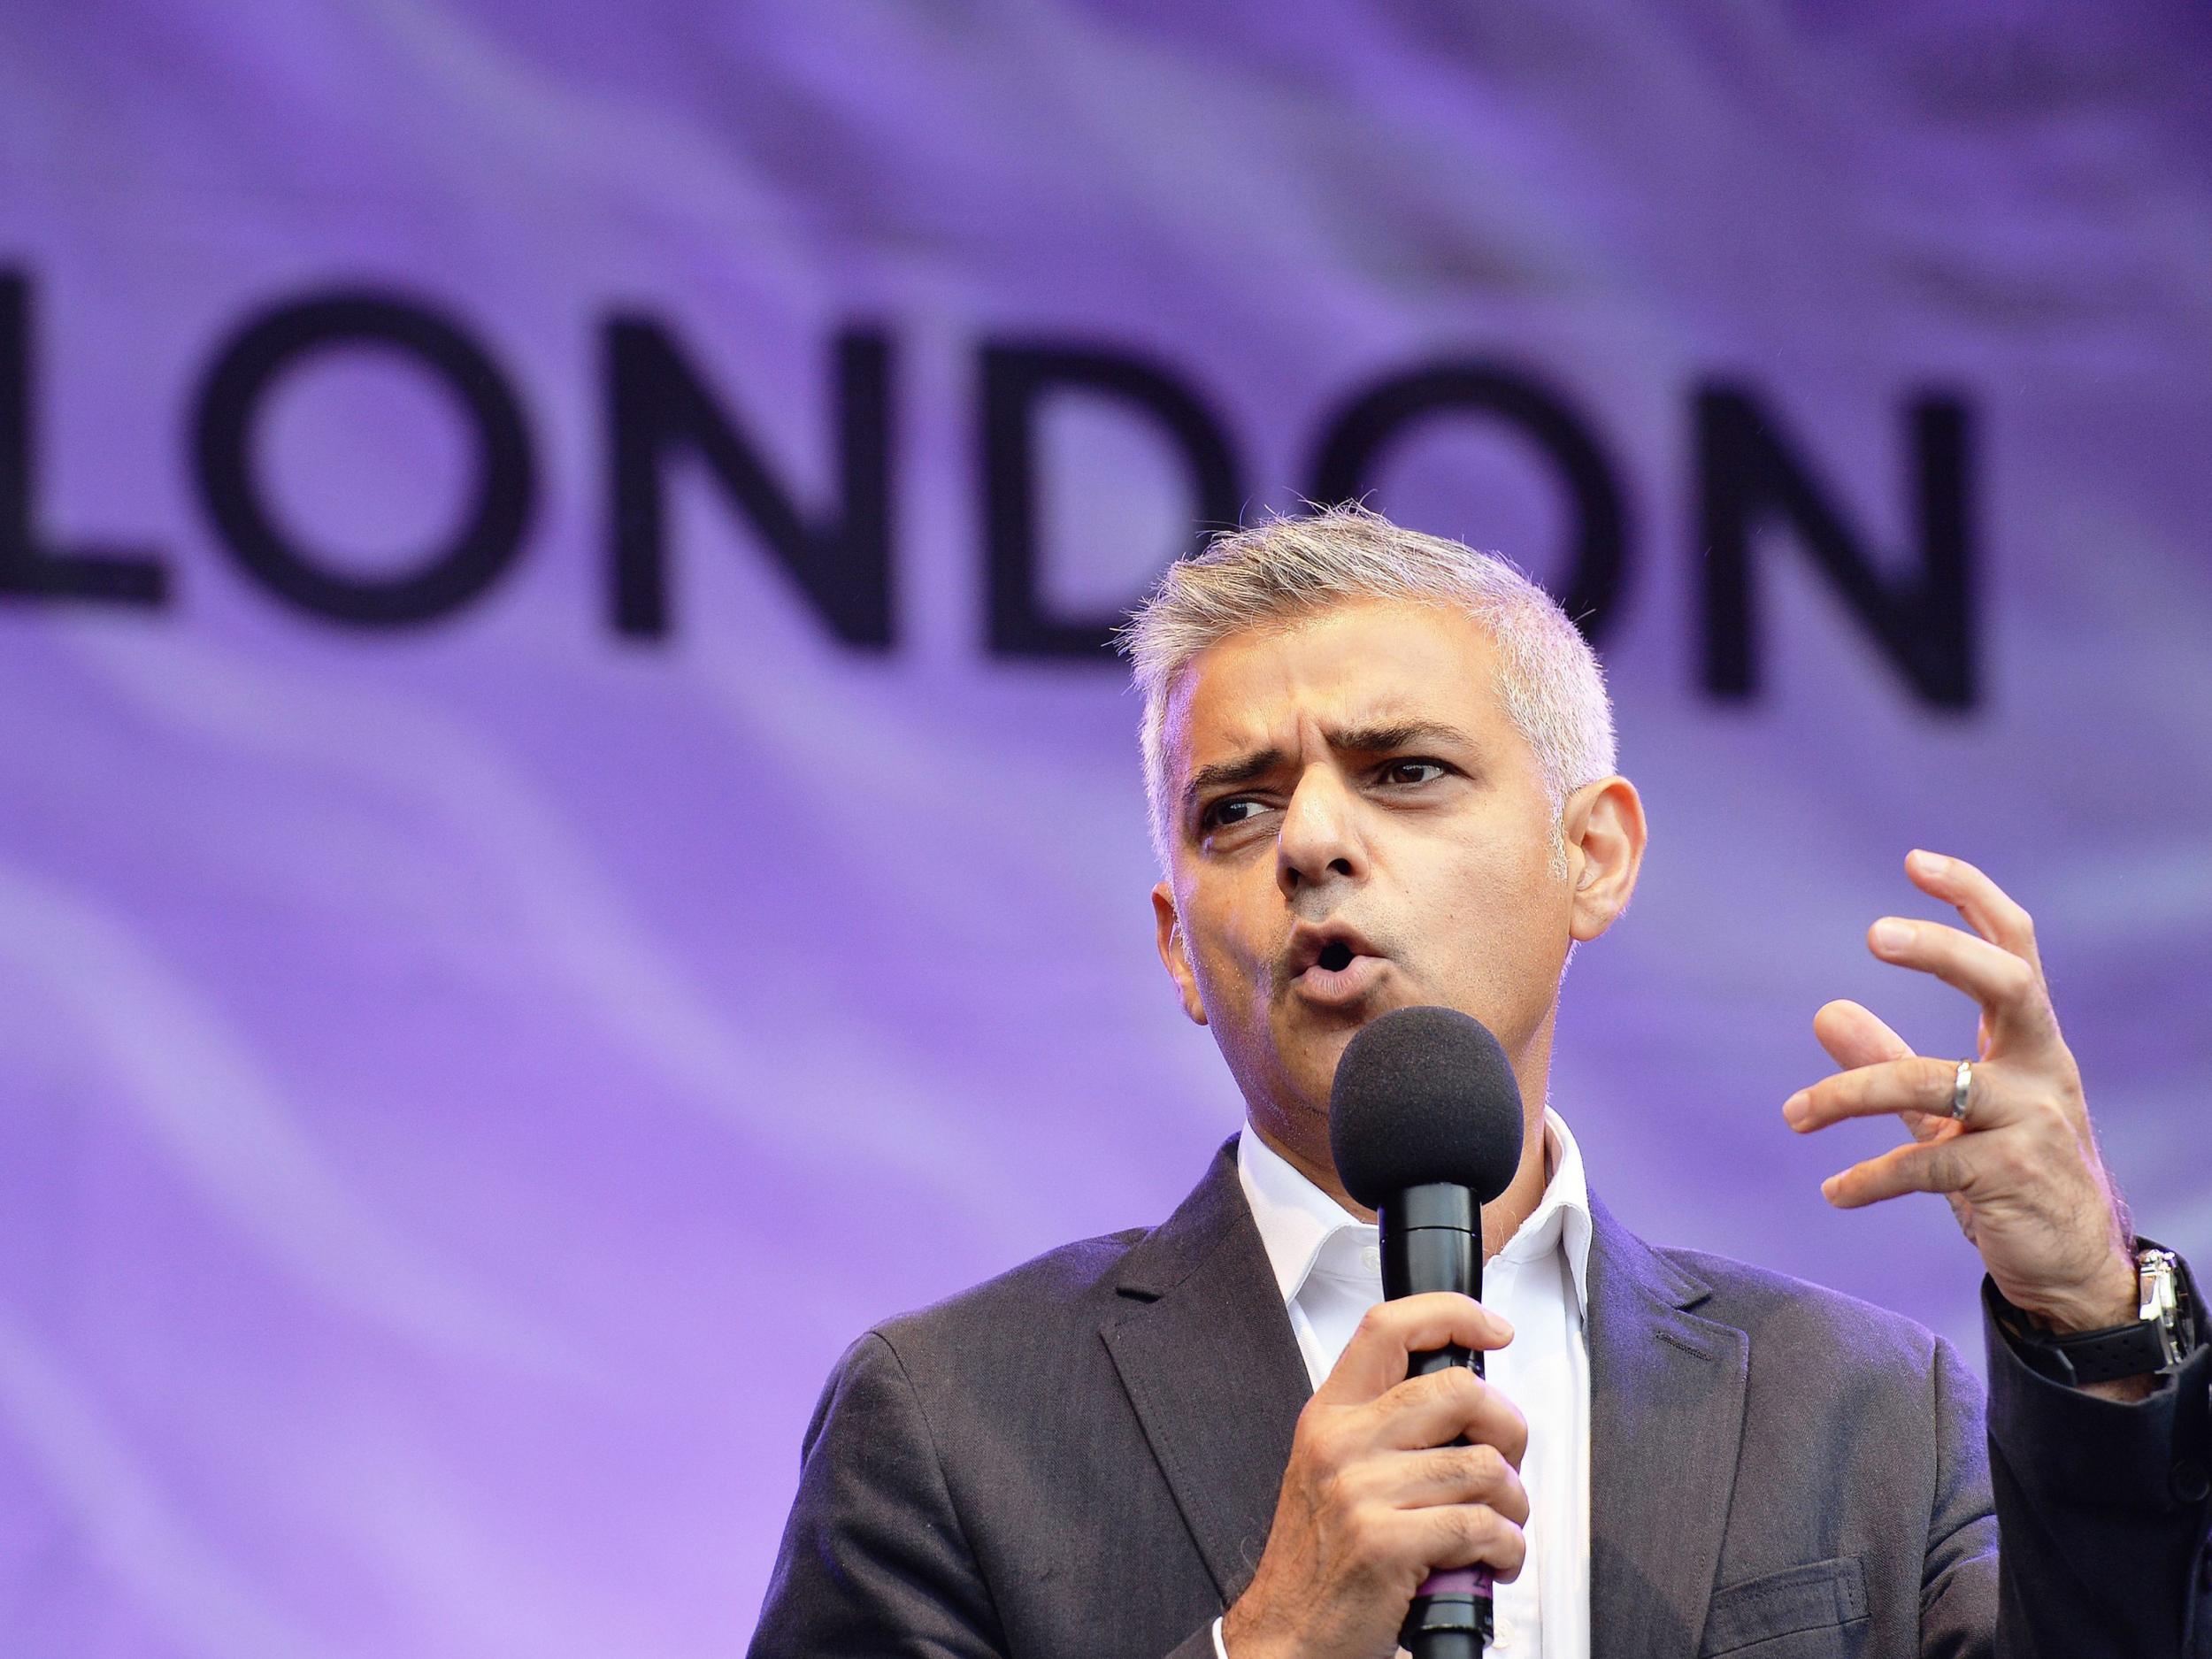 Sadiq Khan has formed a panel of advisory experts to help in London's Brexit negotiations